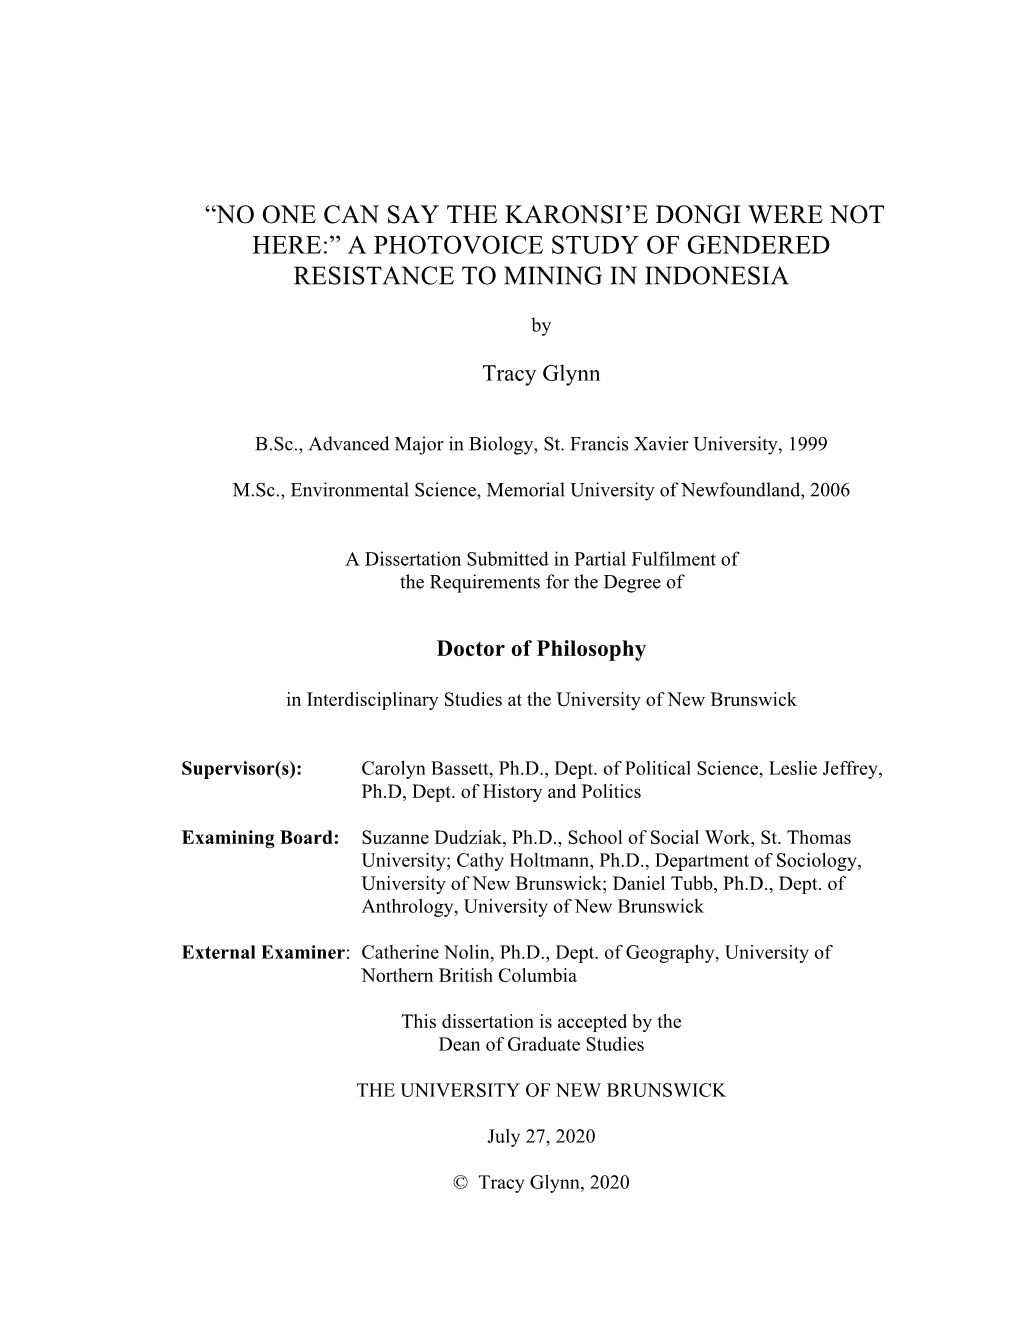 “No One Can Say the Karonsi'e Dongi Were Not Here:” a Photovoice Study